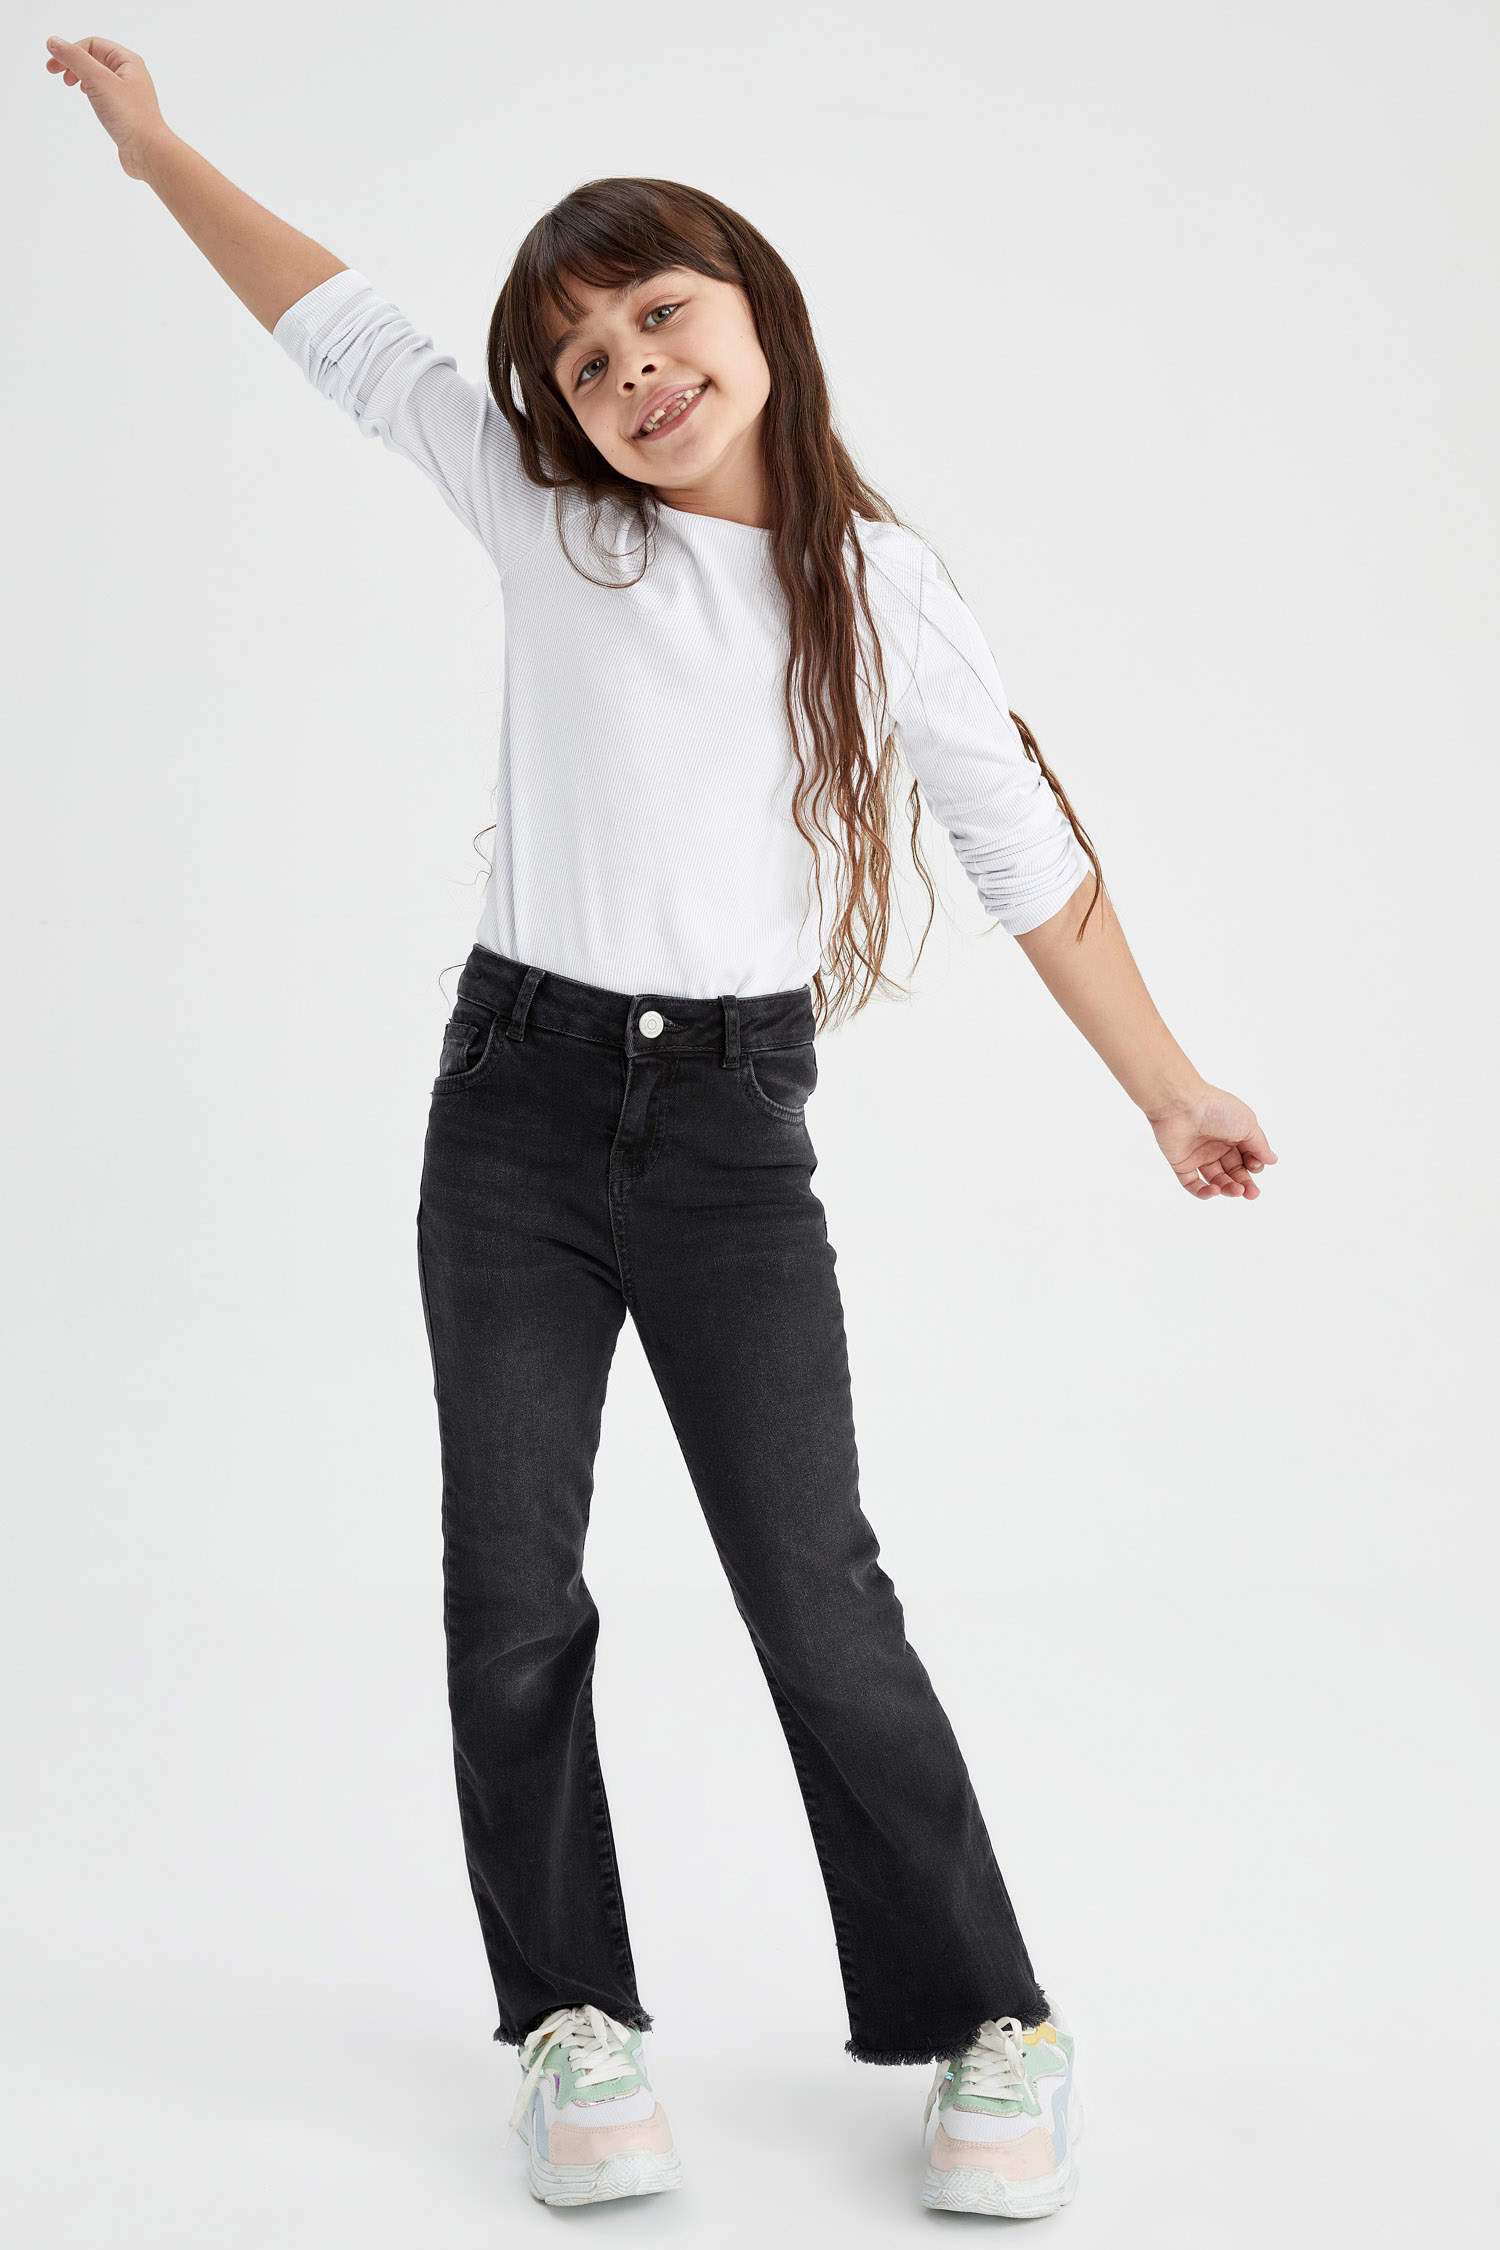 Anthracite GIRLS & TEENS Jean Trousers 2539799 | DeFacto